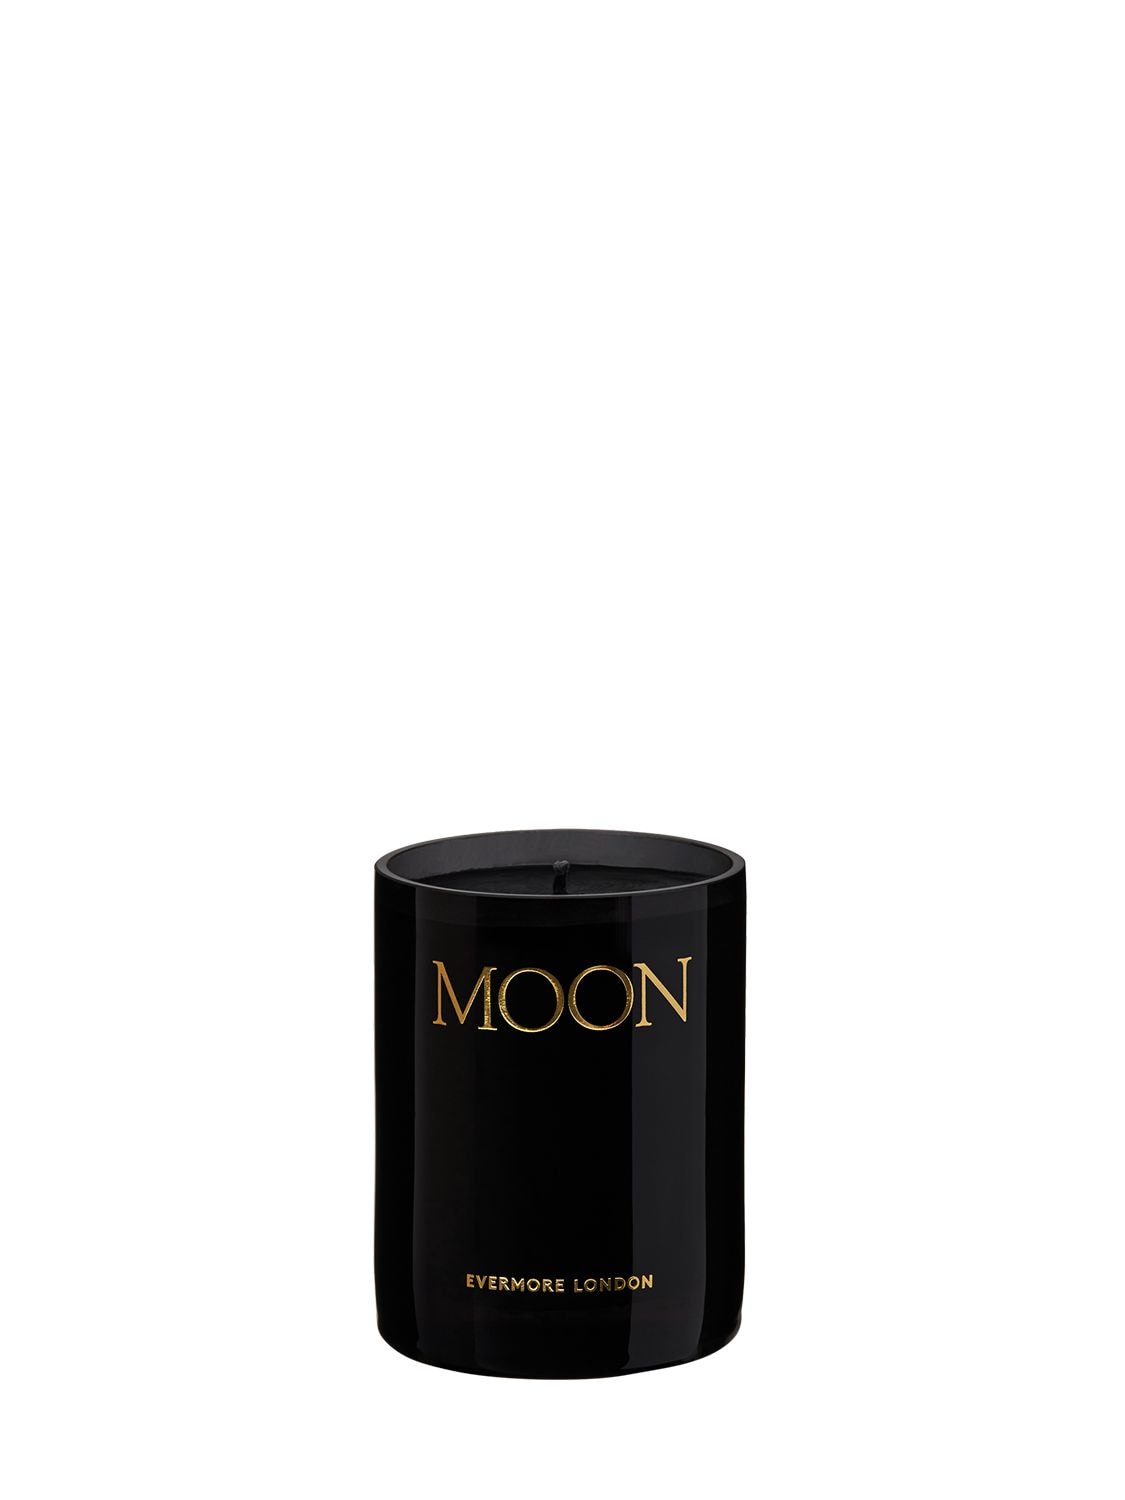 Evermore 300g Moon Scented Candle In Black